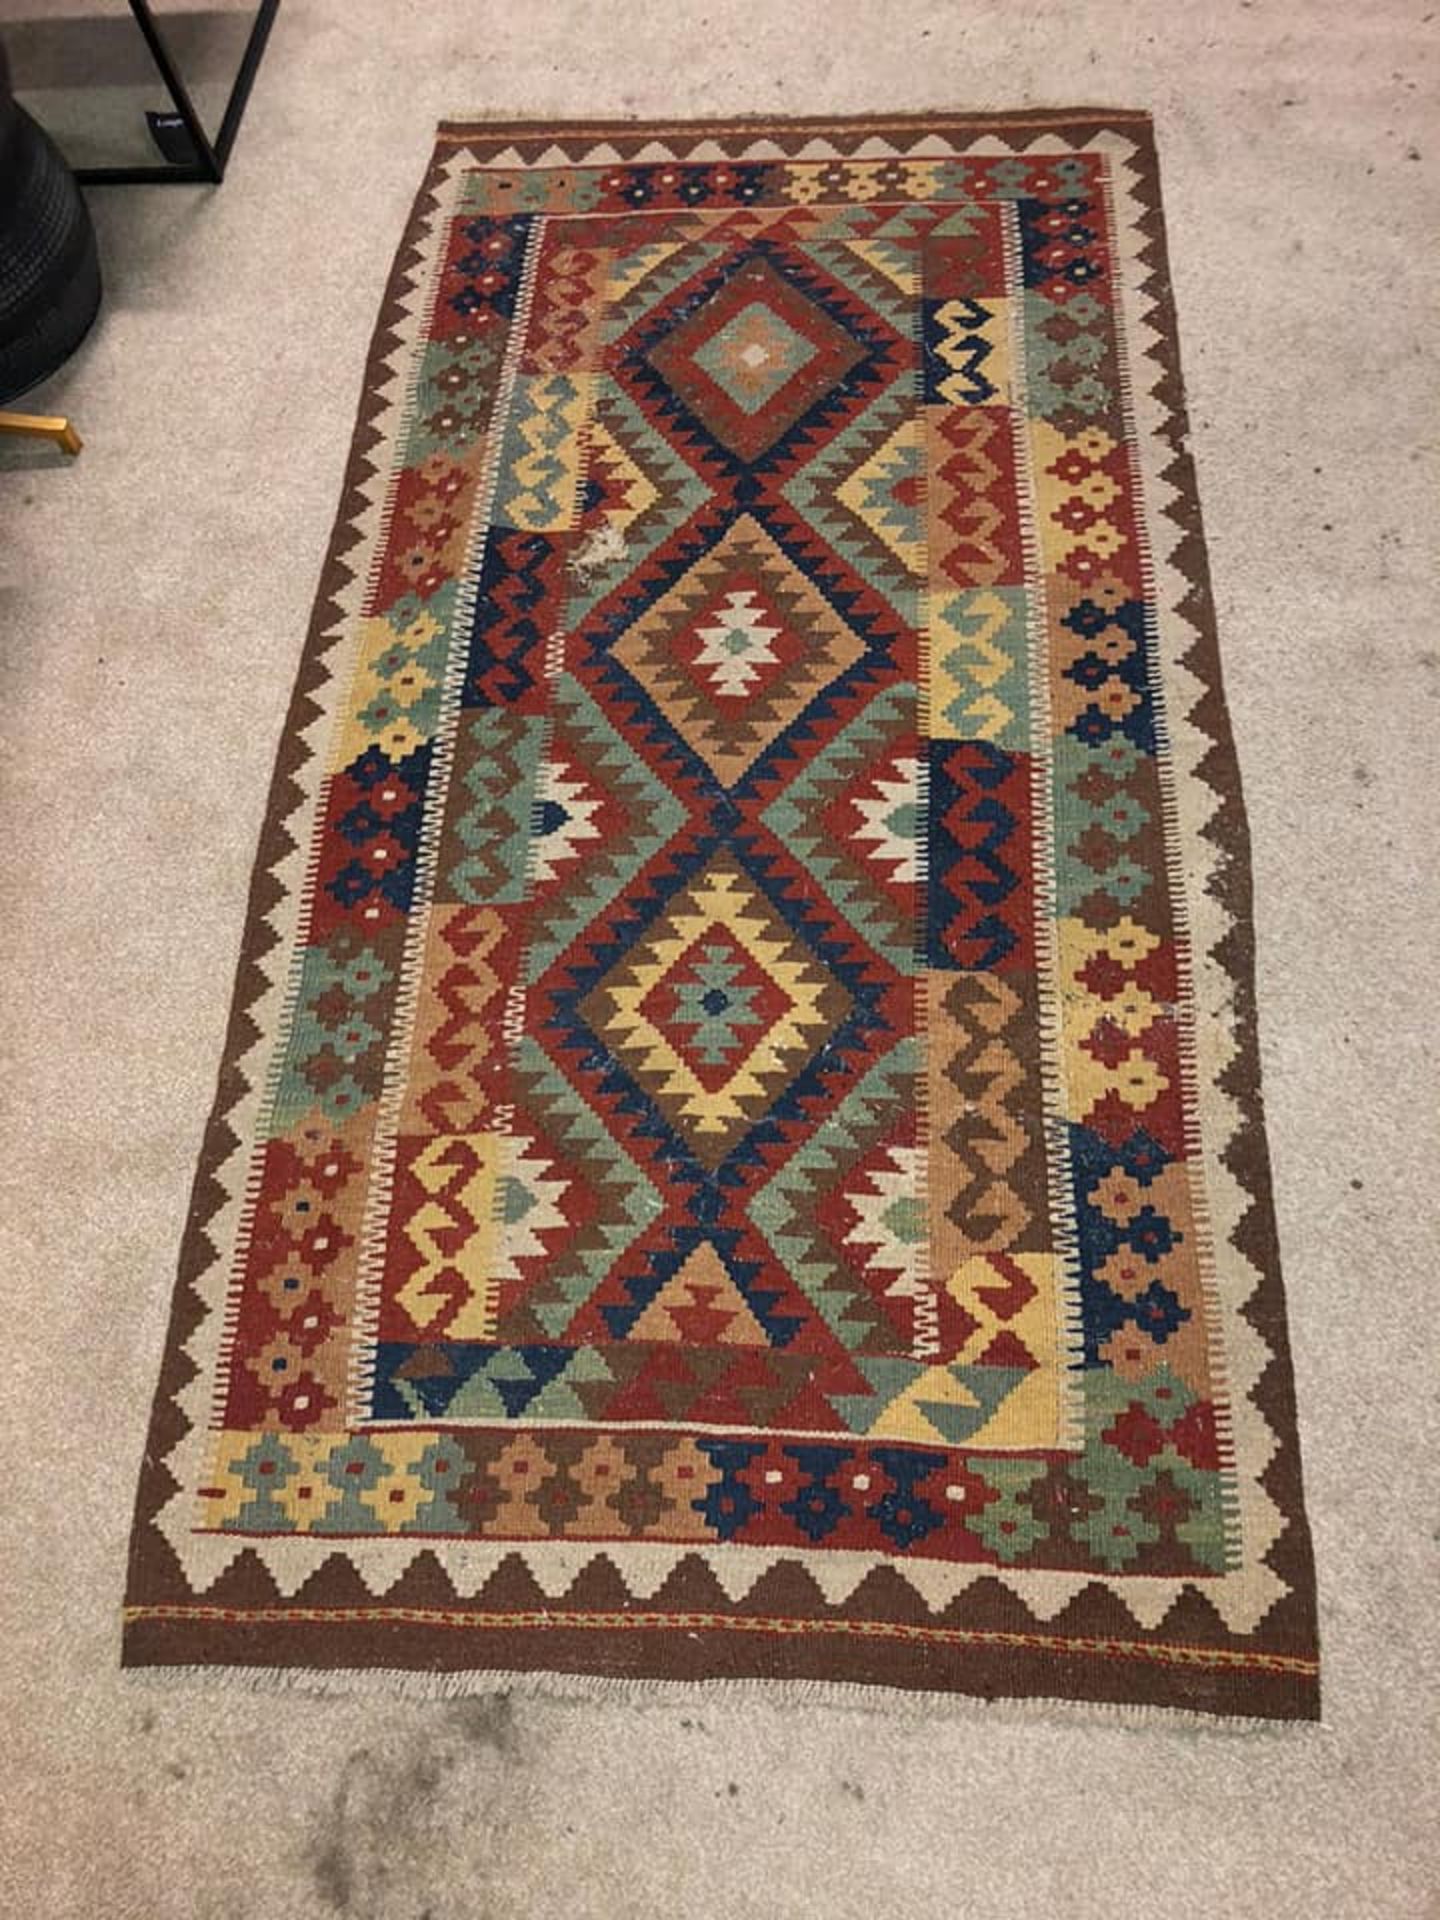 A Vintage Afghani Woven Galmori Rug 100% Short Wool Pile Handmade 180 X 100cm Complete With